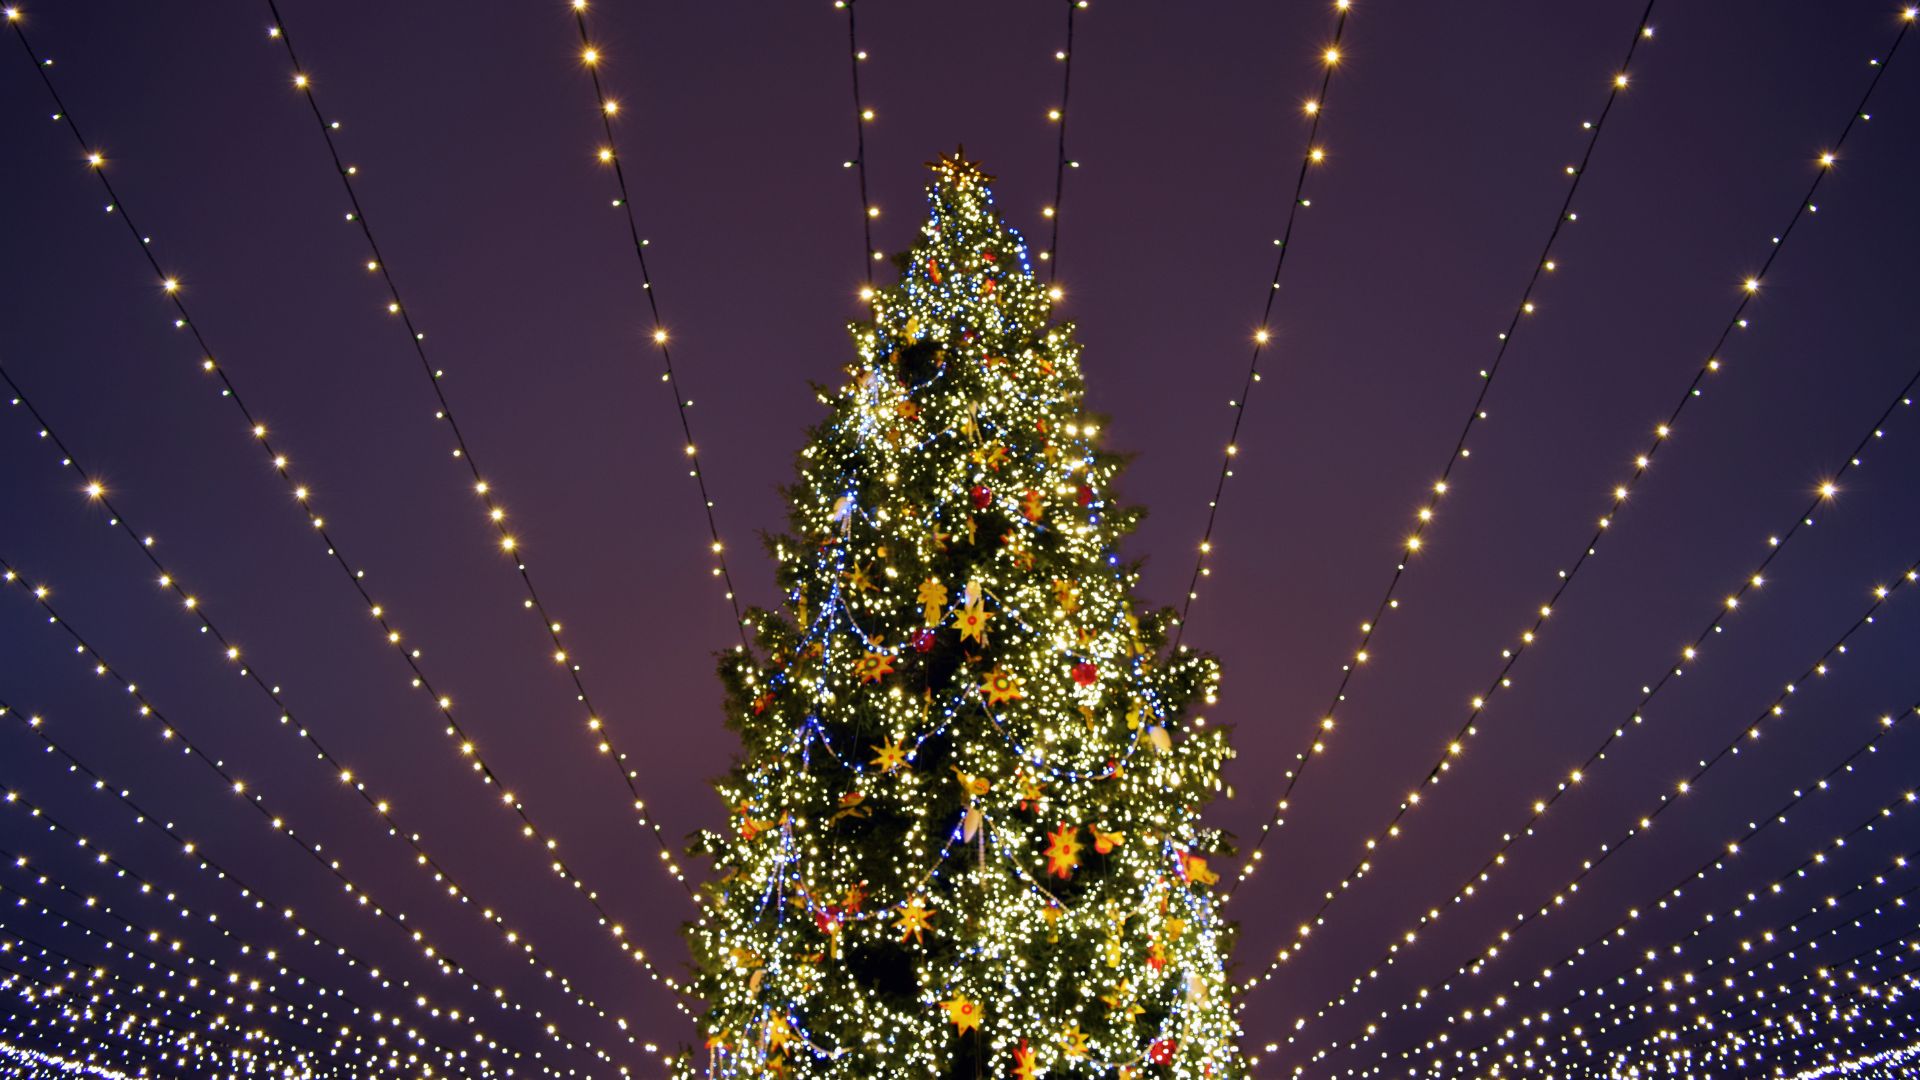 View looking up a lit Christmas tree with strands of lights radiating outward